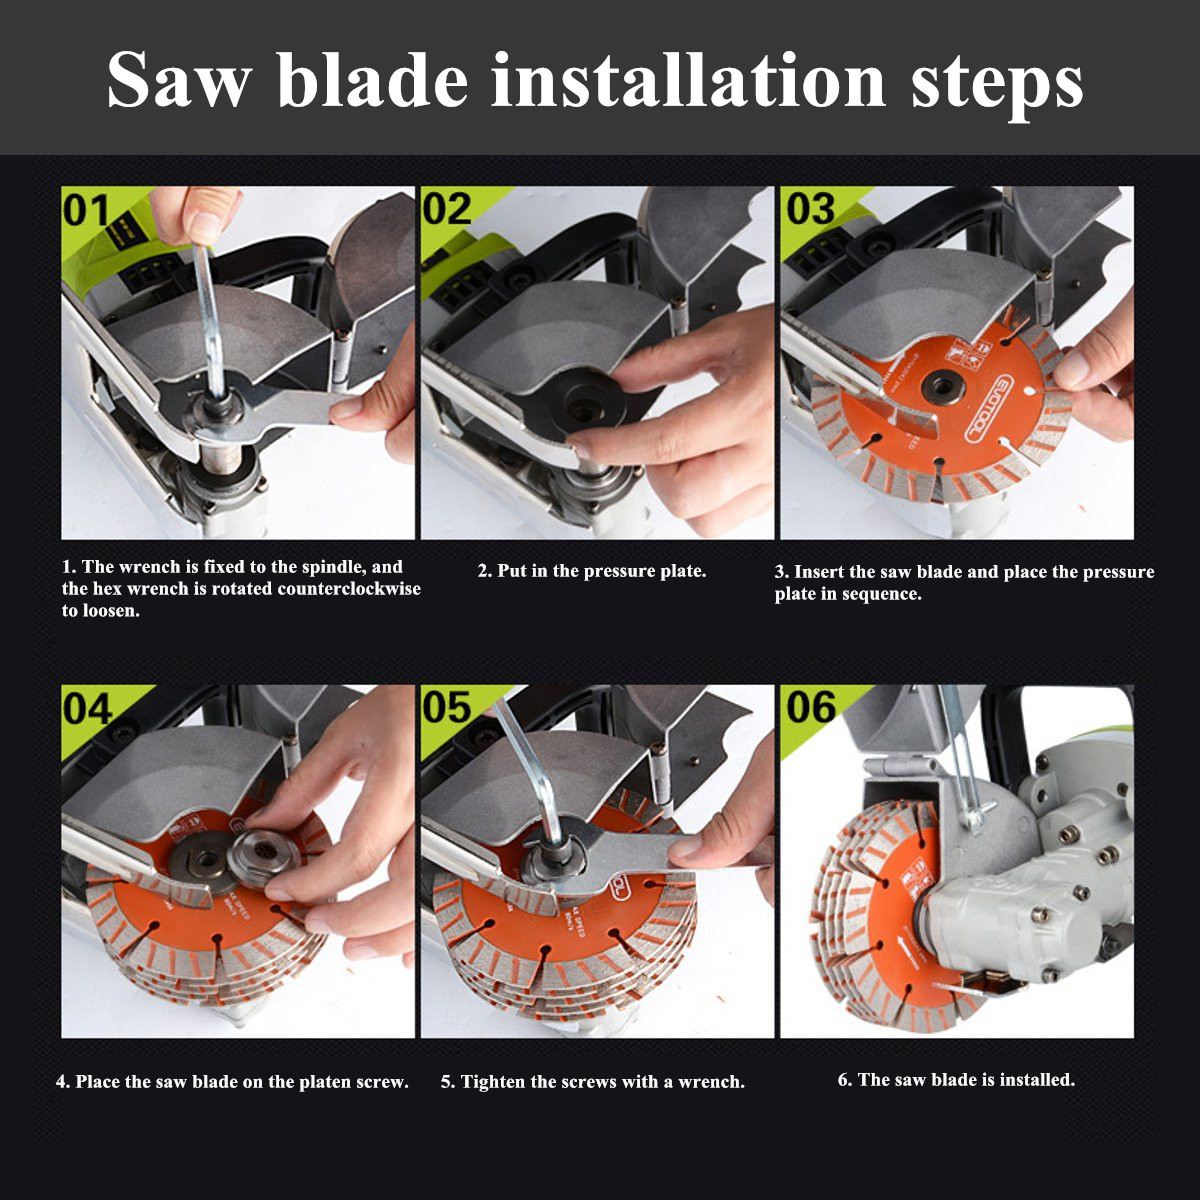 Electric Brick Wall Groove Cutting 220V 4000W Steel Concrete Cutter Slotting Machine diy Home Decoration Grooving Power Tools